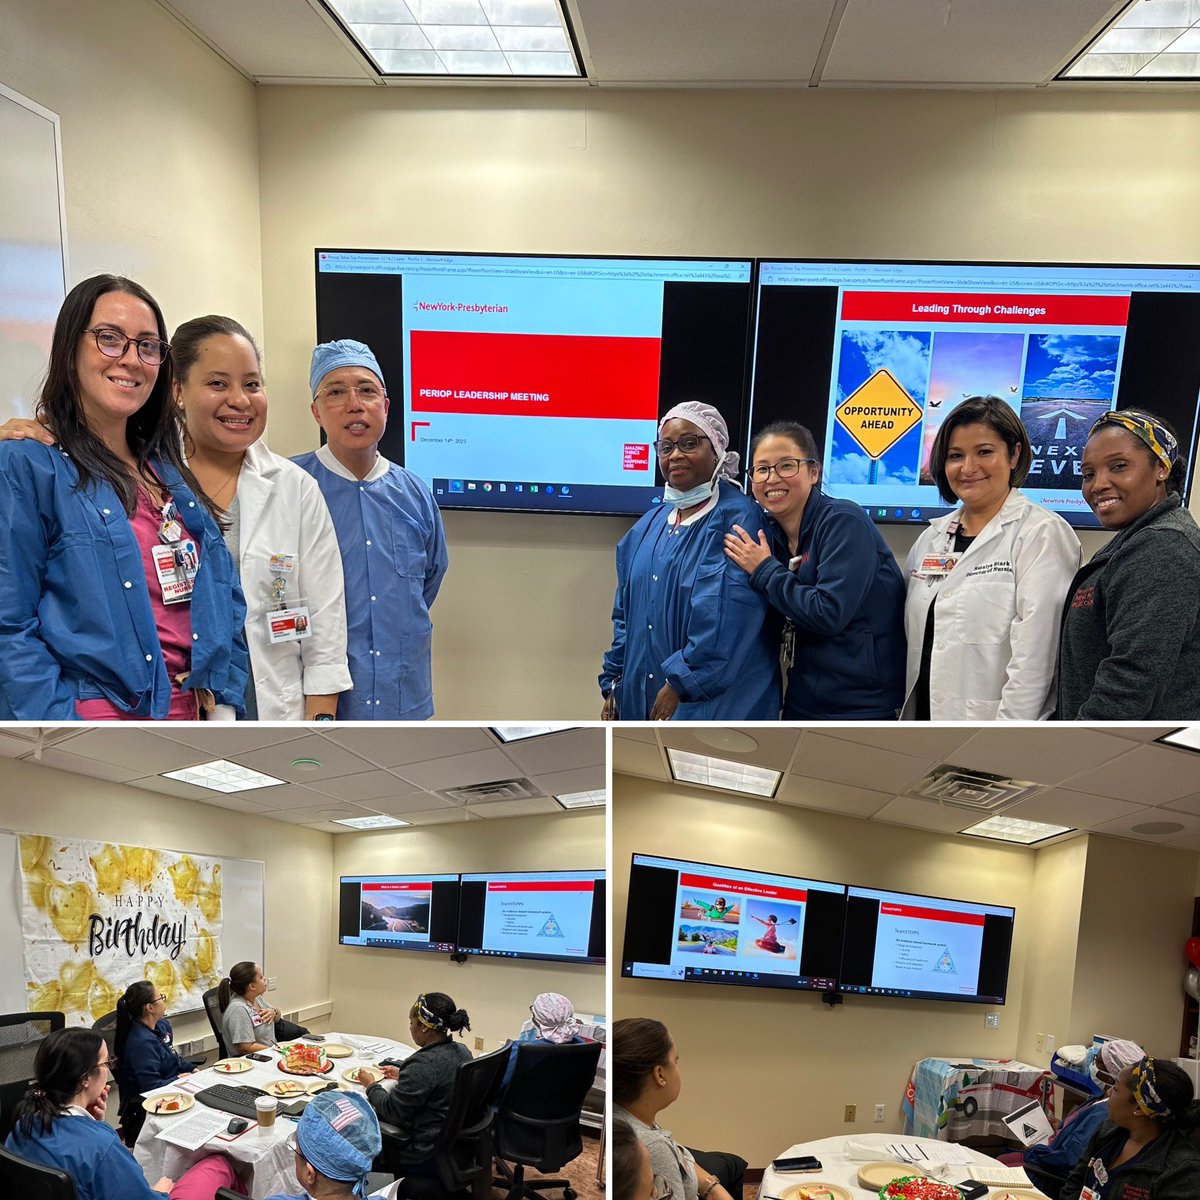 Amazing BMH/CCH Periop Tabletop Final Leadership Session! I am so proud of our CNM’s and their Leadership Presentations! #ProfessionalDevelopment #TransformationalLeadership #NYPStayAmazing #ProudDON @WilieMManzano @nyphospital @lystra_m @alanmlevin 💫🌟🎈🏥